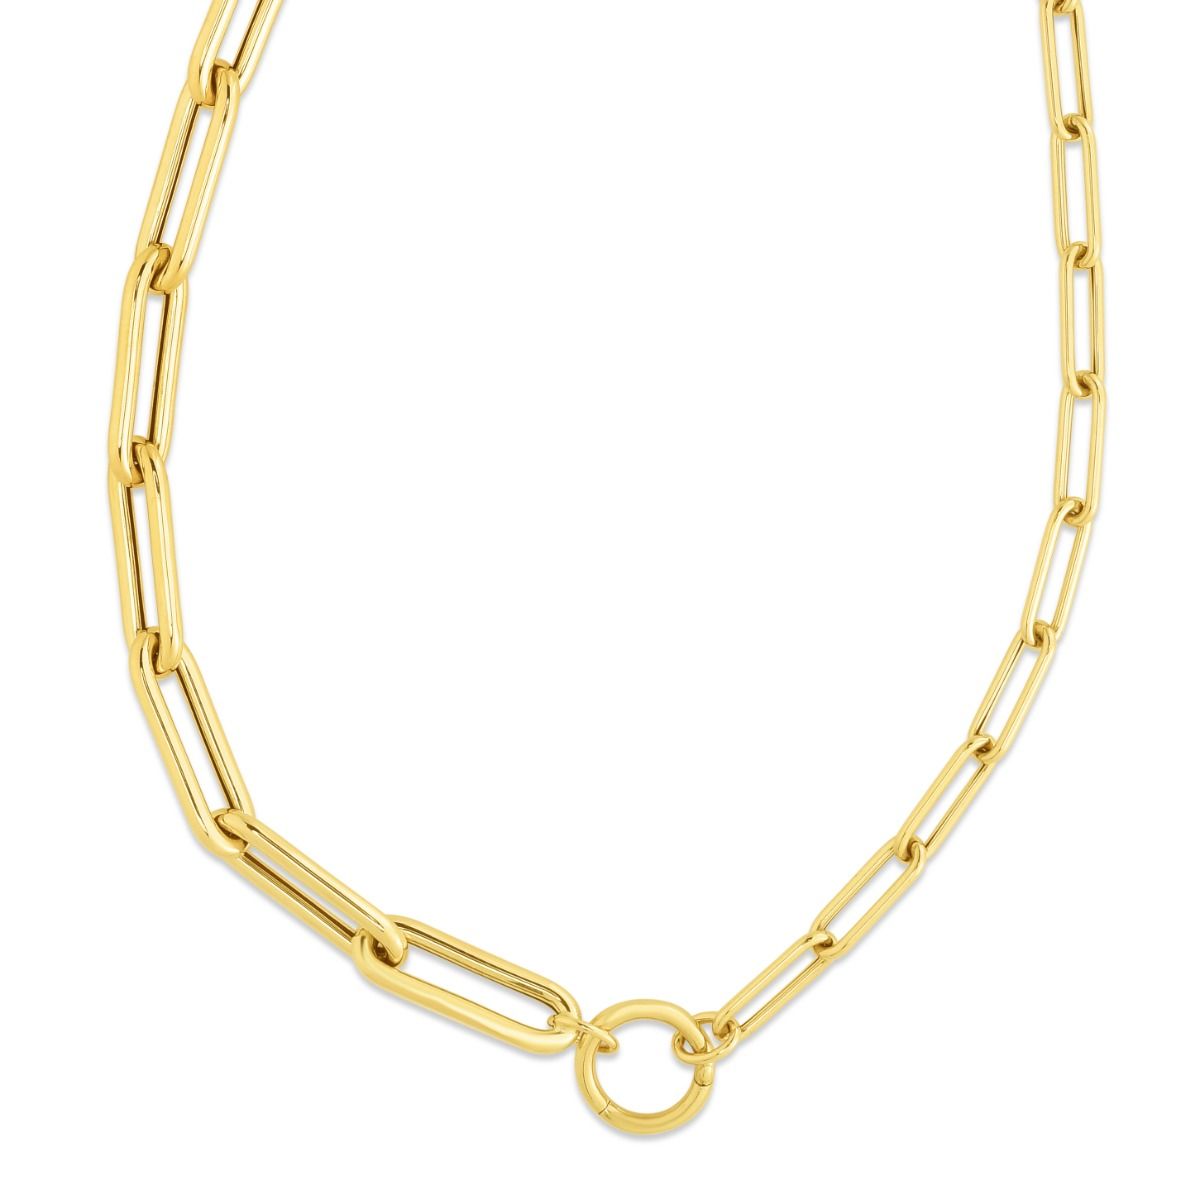 24K 995 Pure Gold Paperclip Necklace for Women - 1-1-GN-V00581 in 44.690  Grams